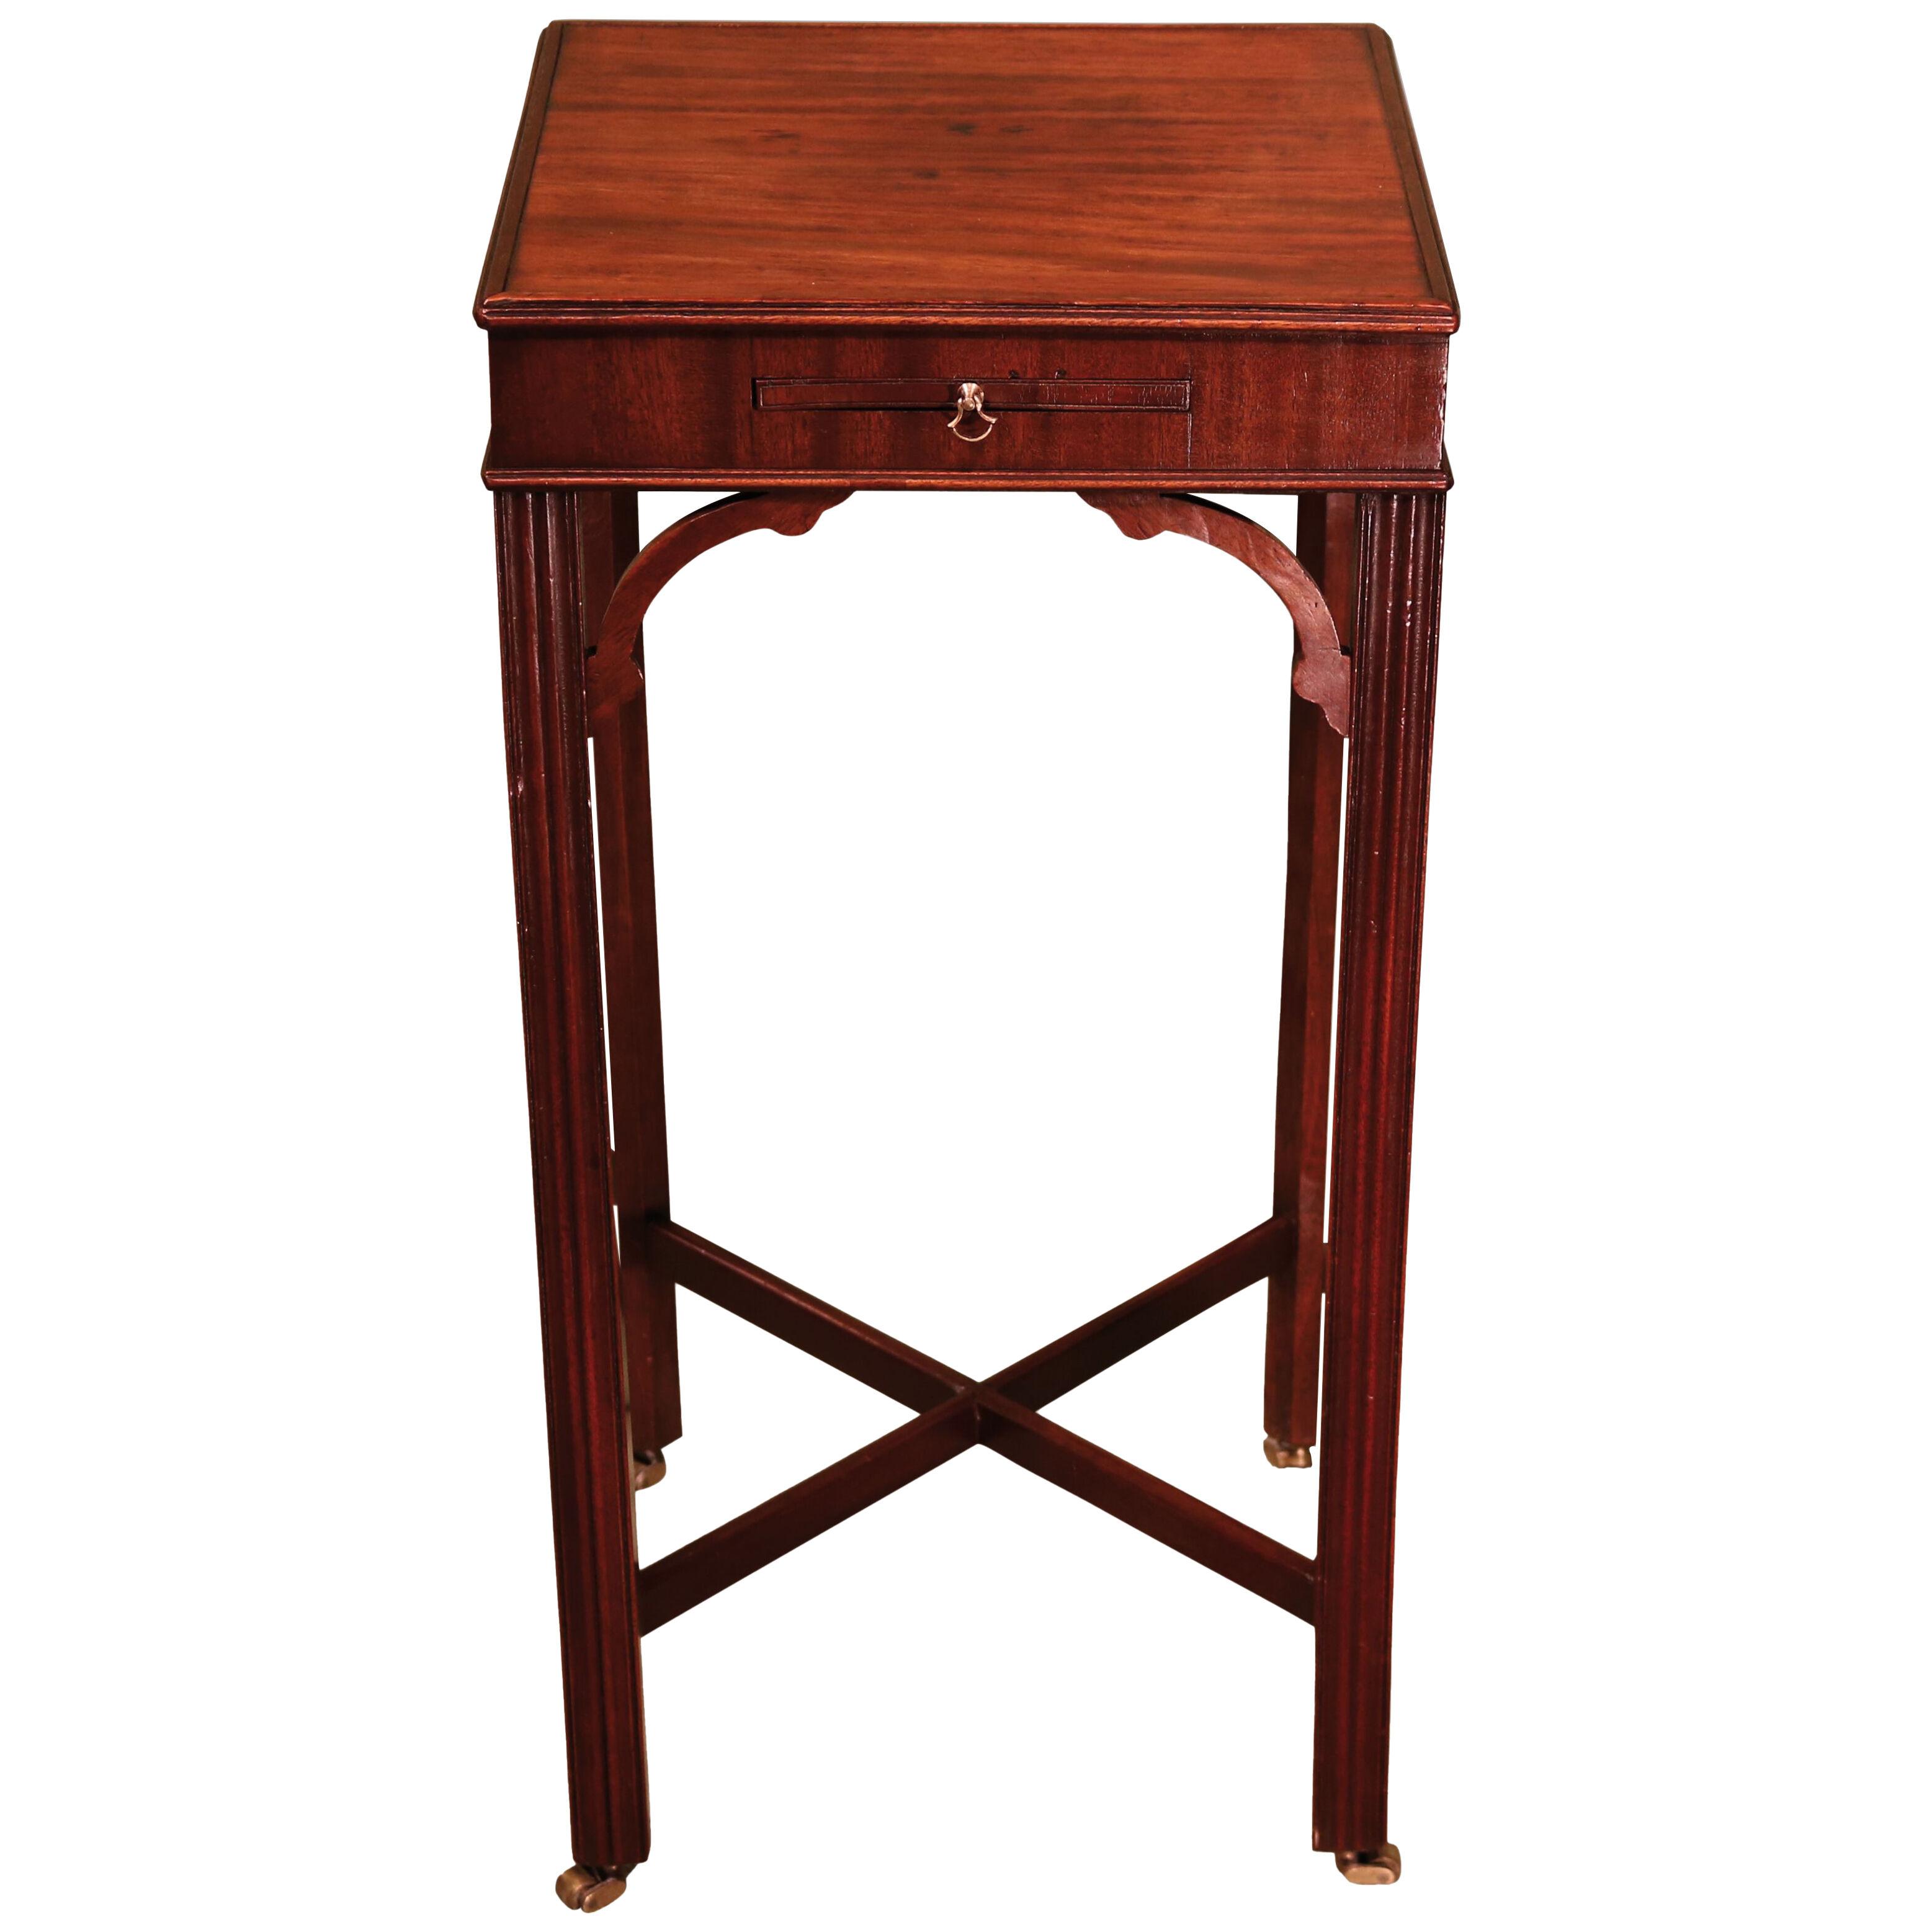 A Chippendale period mahogany kettle stand